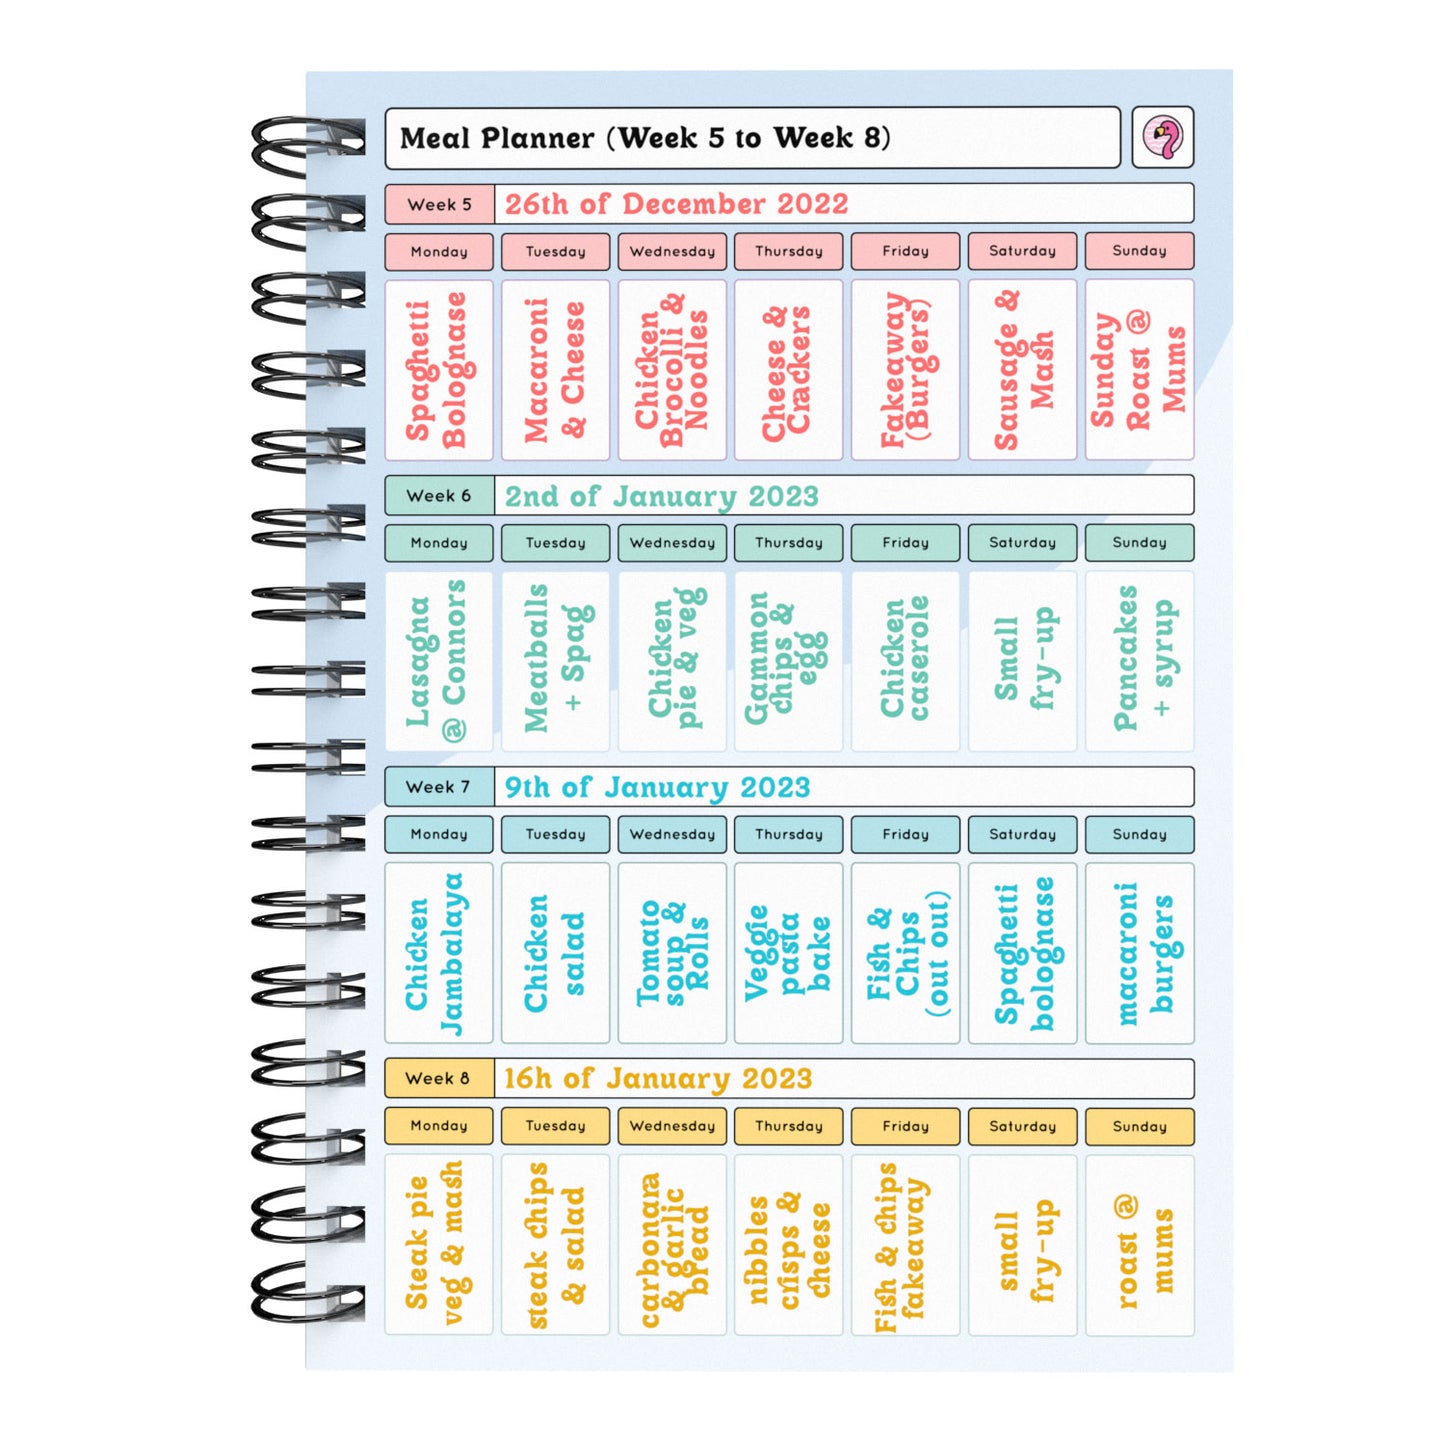 Food Diary - C26 - Calorie Counting